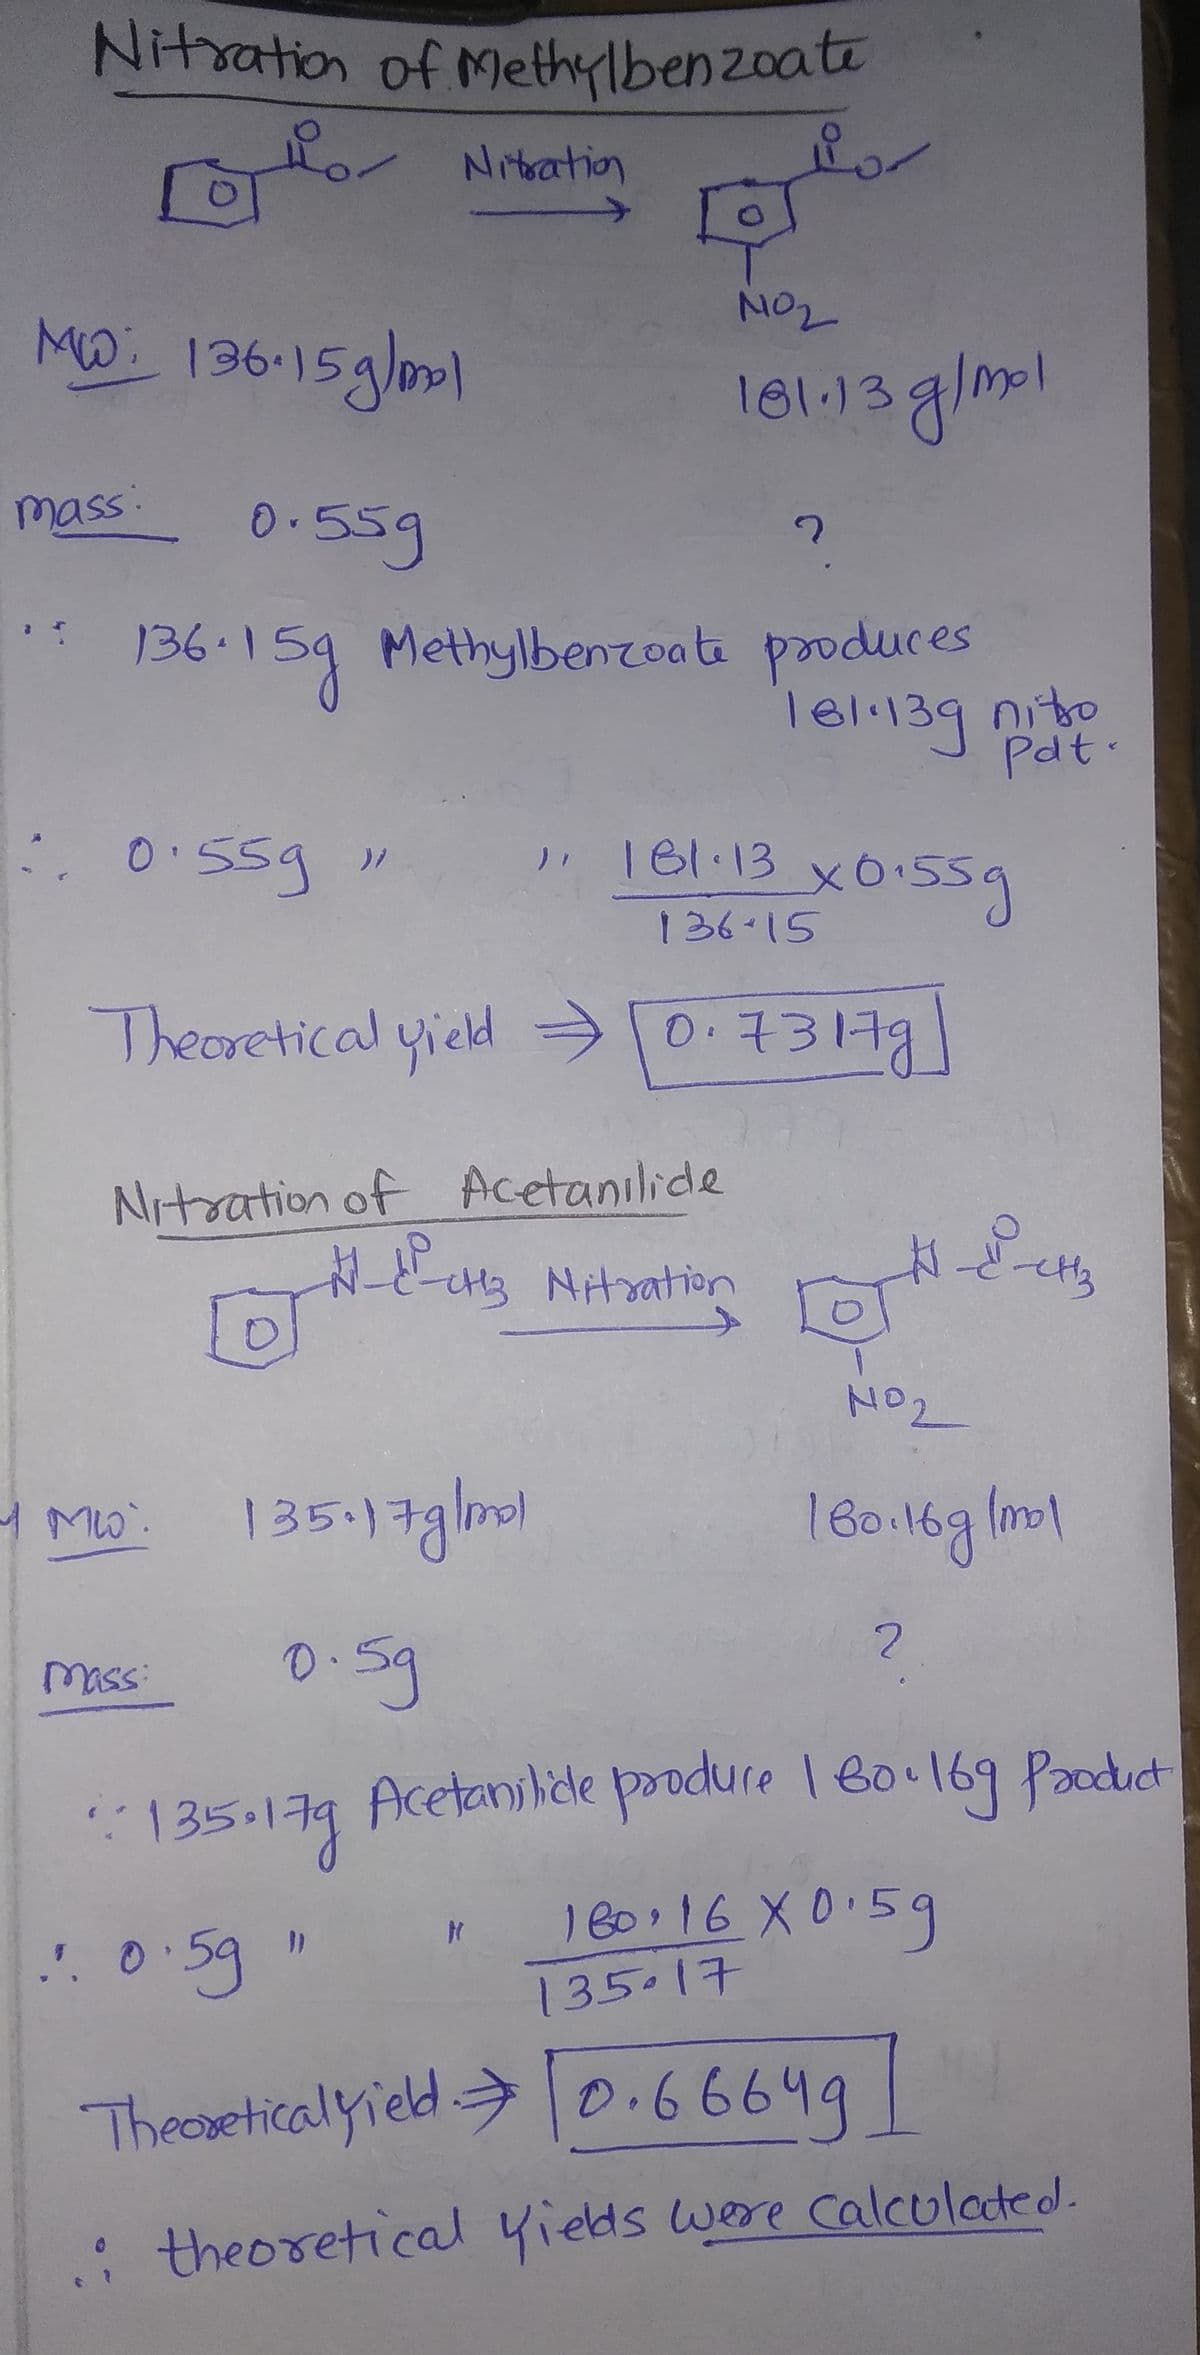 Nitsation of Methylbenzoate
Por Nitratio
NO2
MD: 136-15glol
181.13 g/ml
mass:
0.55g
136-159
Methylbenzoate produces
Te1.139 nito
Pdt.
0:55g"
" 181.13
136-15
Theoretical yield 0.73179
Nitration of Acetanilide
[D]
135-17glnol
16016g lm1
mass:
135.179
Acetanilide produre Boo169 Paoduct
1 80.16 X0:59
135.17
Theeseticalyield0.66649
: theoretical yieds were calculated.
